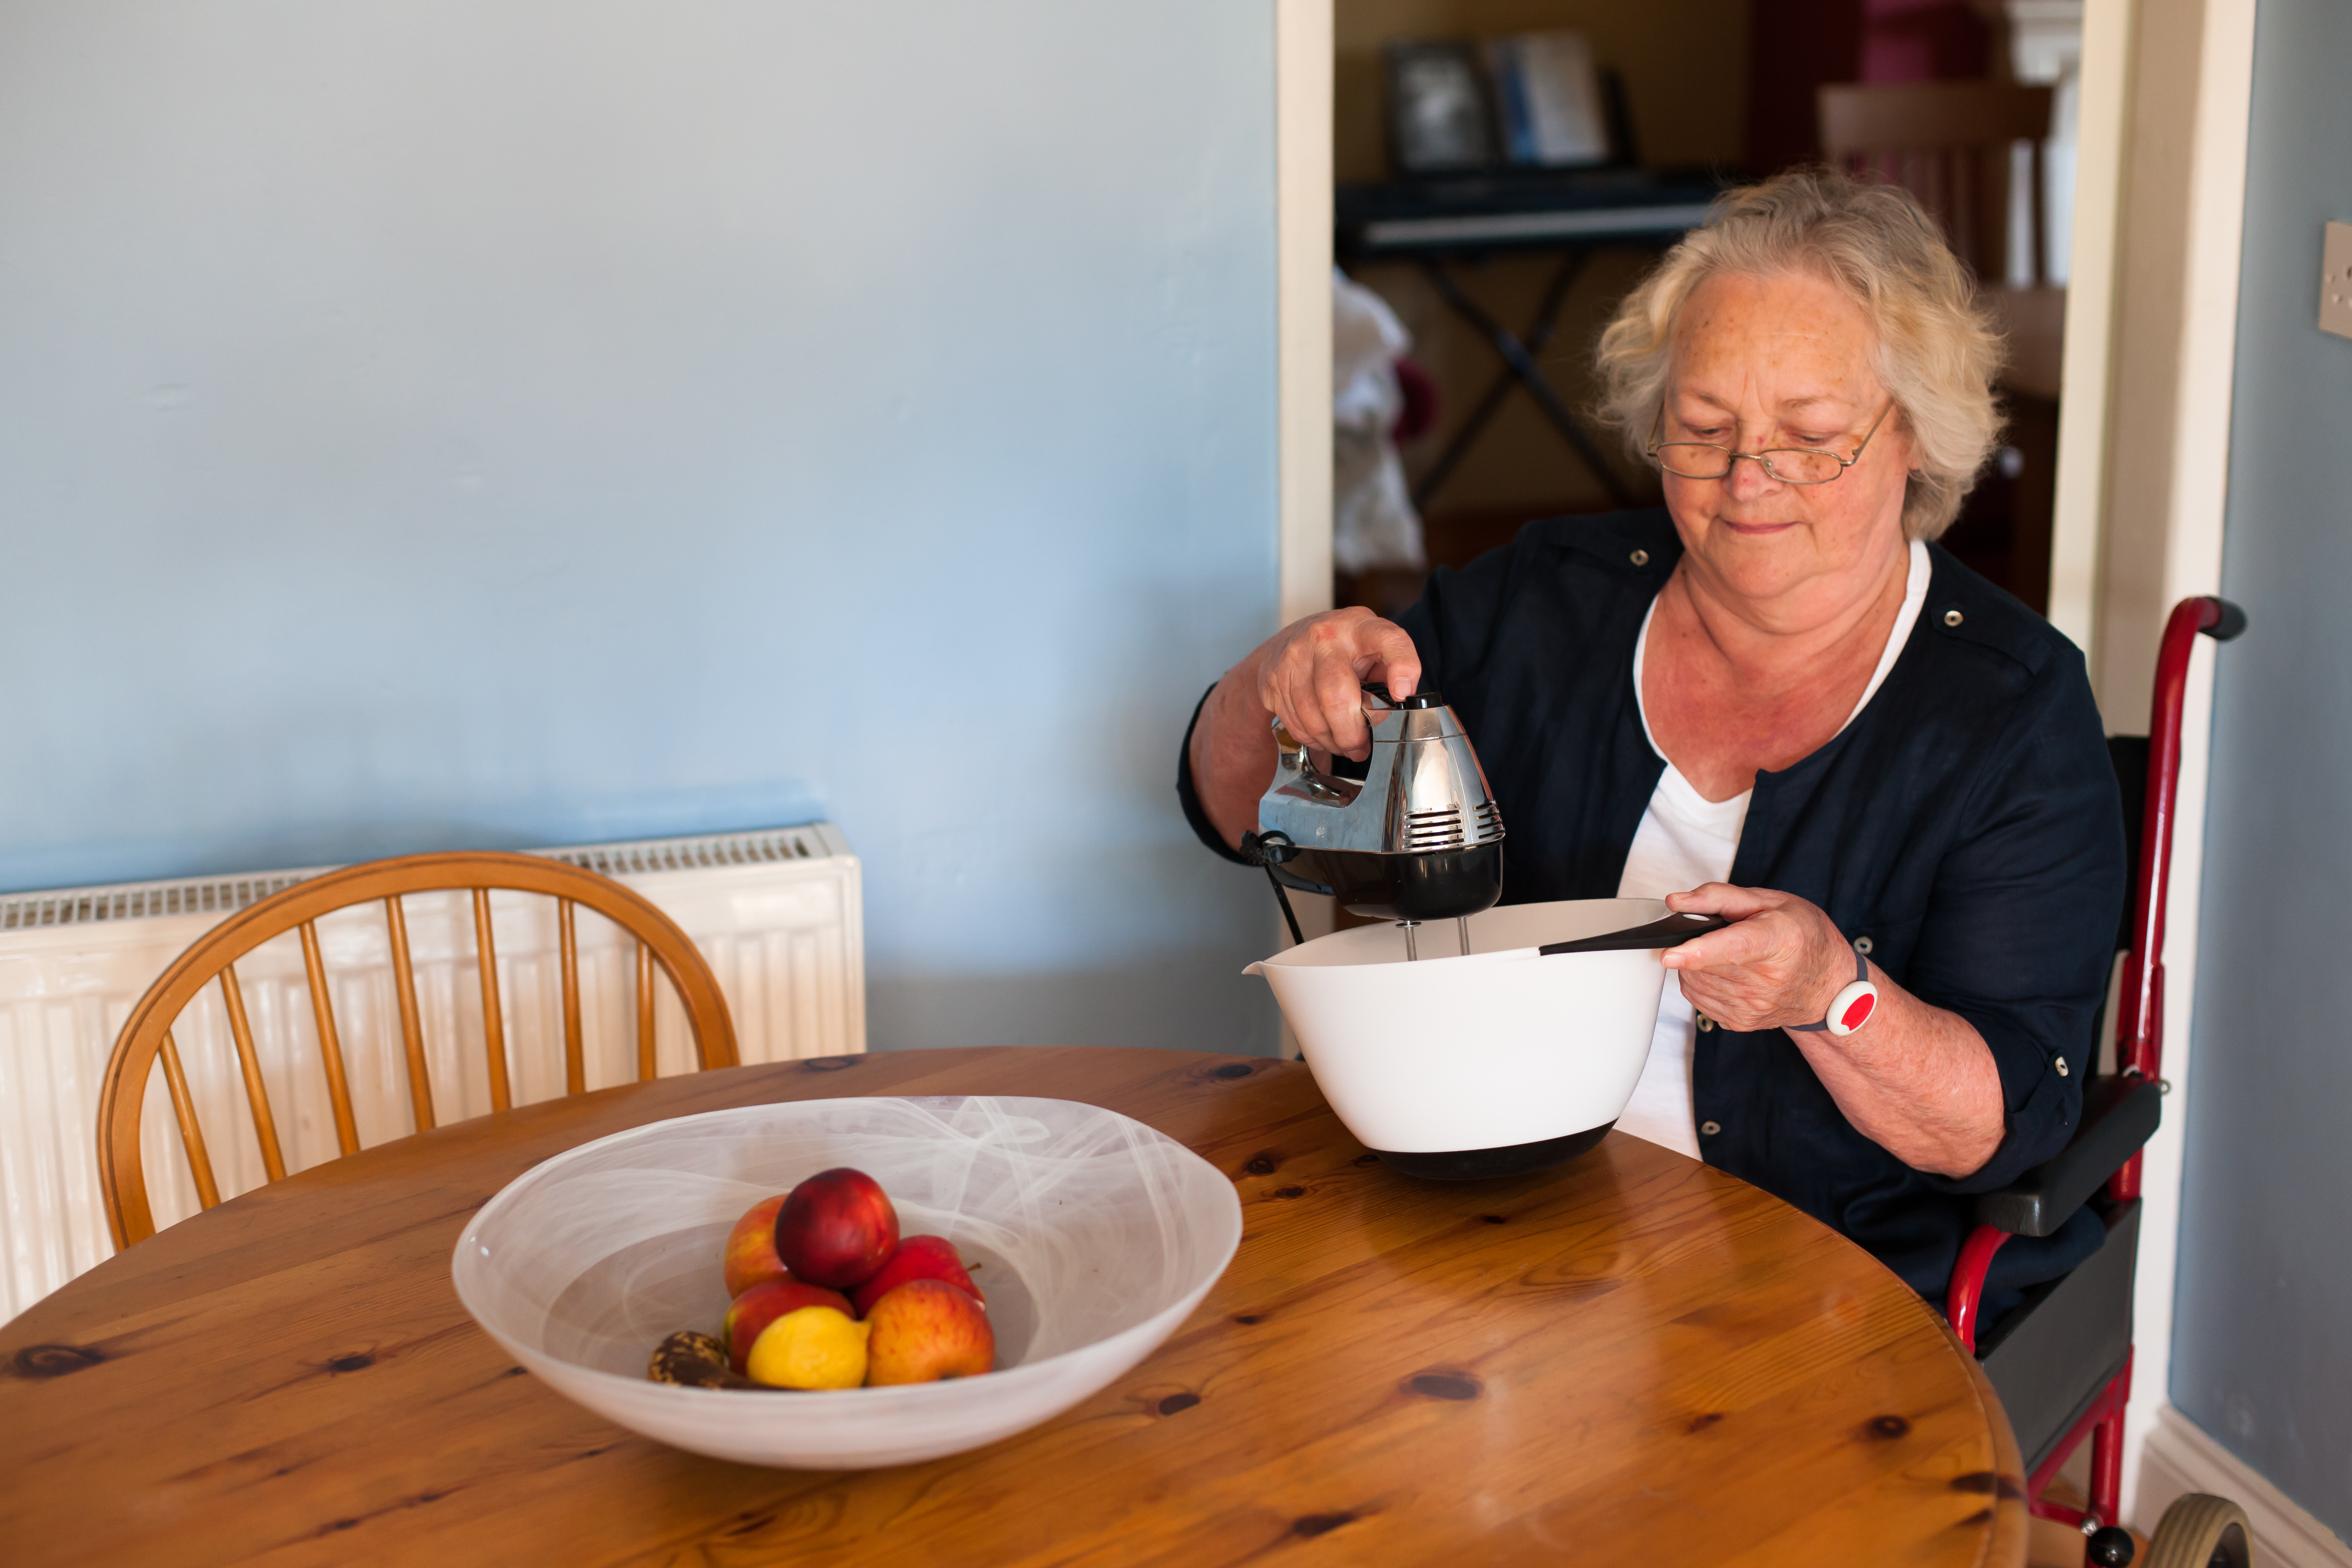 A woman sitting at a kitchen table, whisking ingredients in a bowl